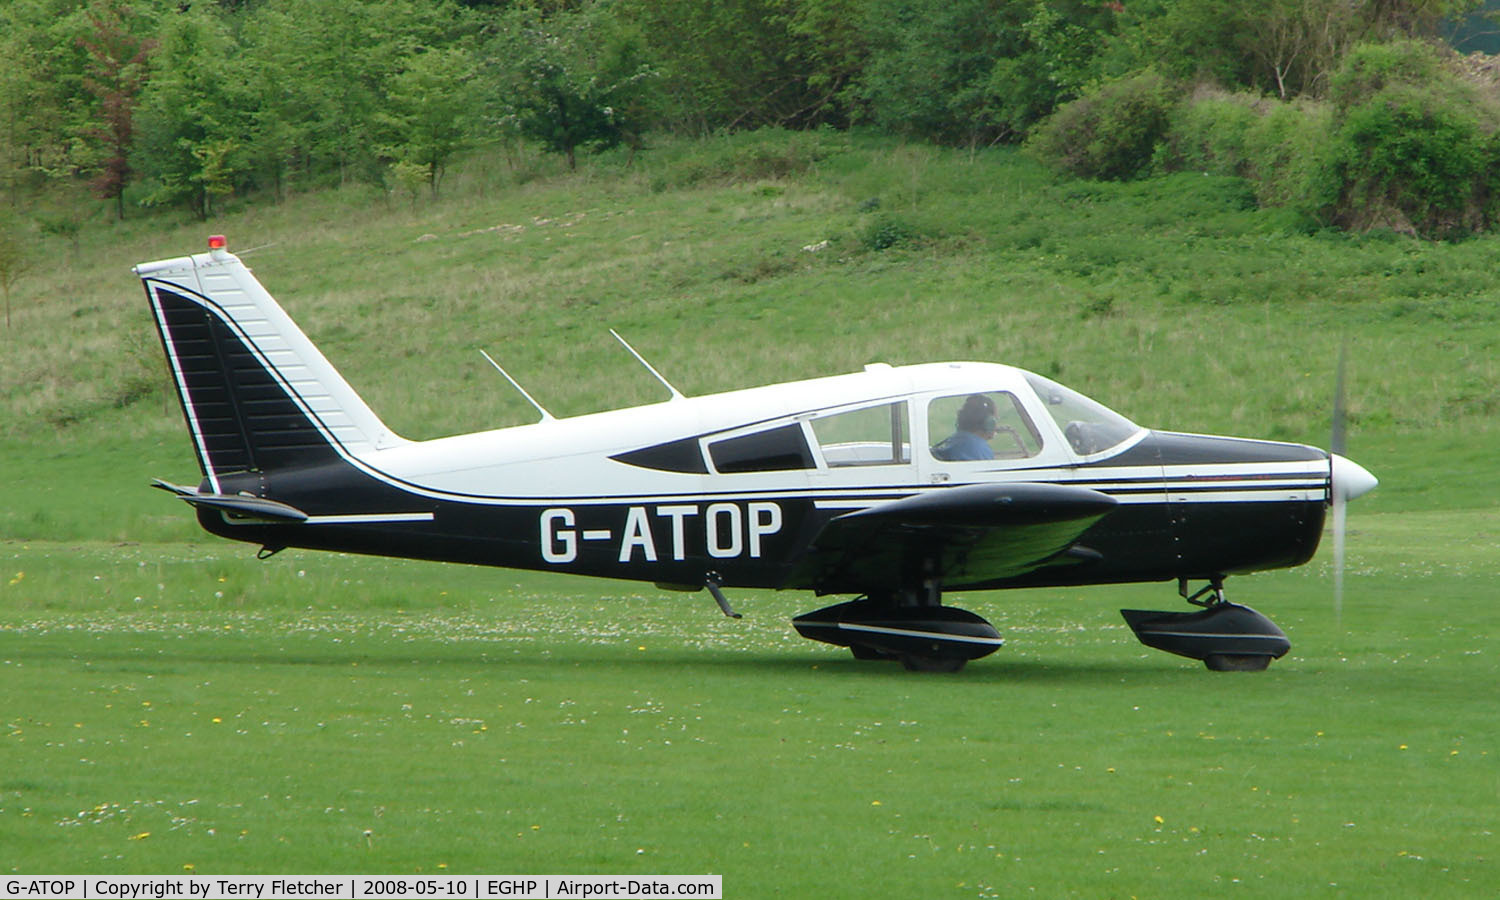 G-ATOP, 1966 Piper PA-28-140 Cherokee C/N 28-21682, A very pleasant general Aviation day at Popham in rural UK